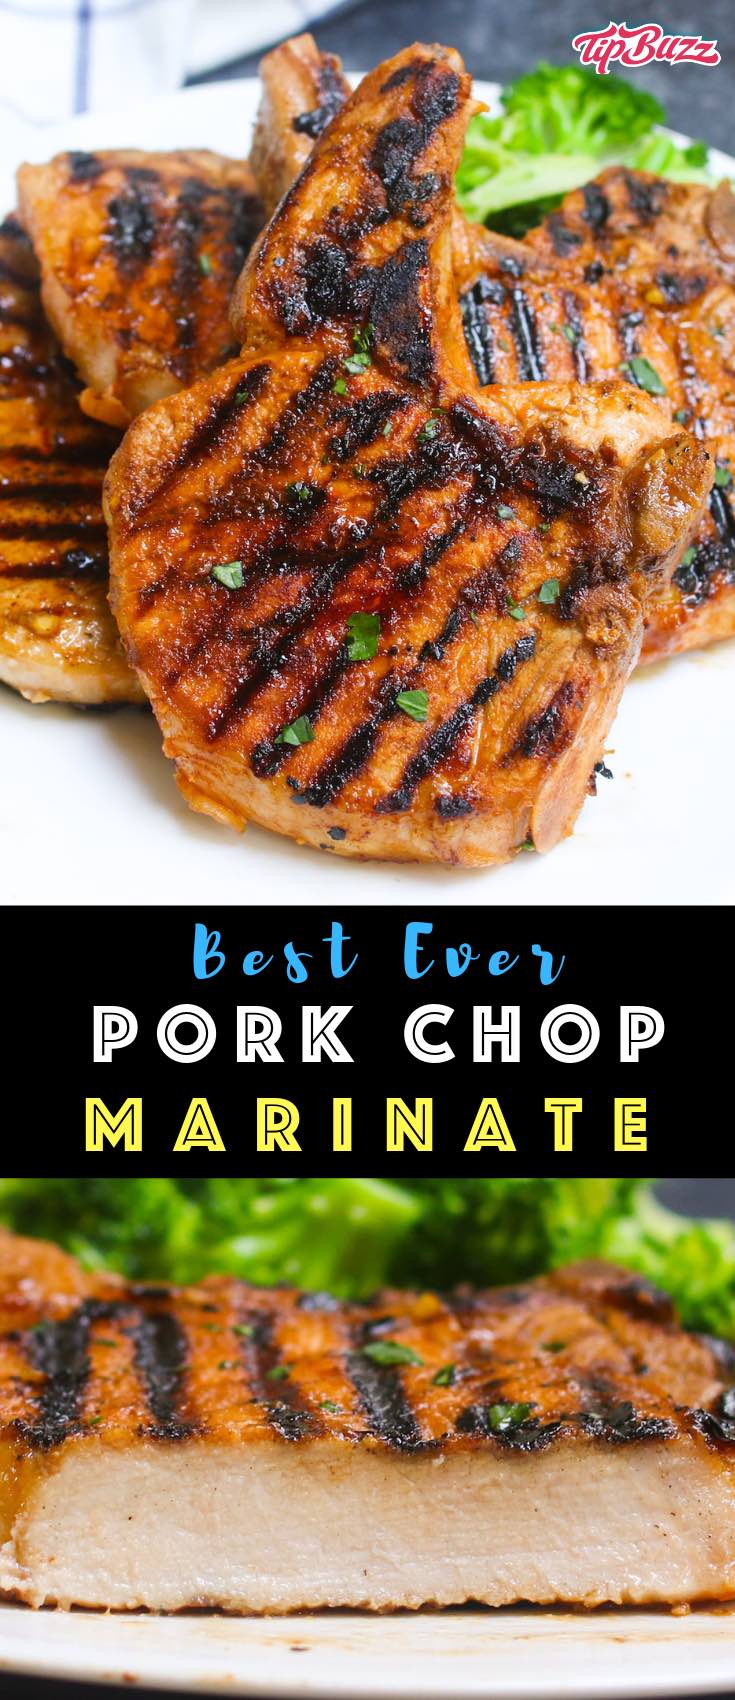 The Best Ever Pork Chop Marinade produces tender and flavorful pork chops every time! It’s an easy pork marinade recipe made with soy sauce, brown sugar, vinegar, garlic, olive oil, and ketchup. These marinated pork chops are perfect for grilling, pan frying, or baking. #porkchopmarinade #easyporkchoprecipes 